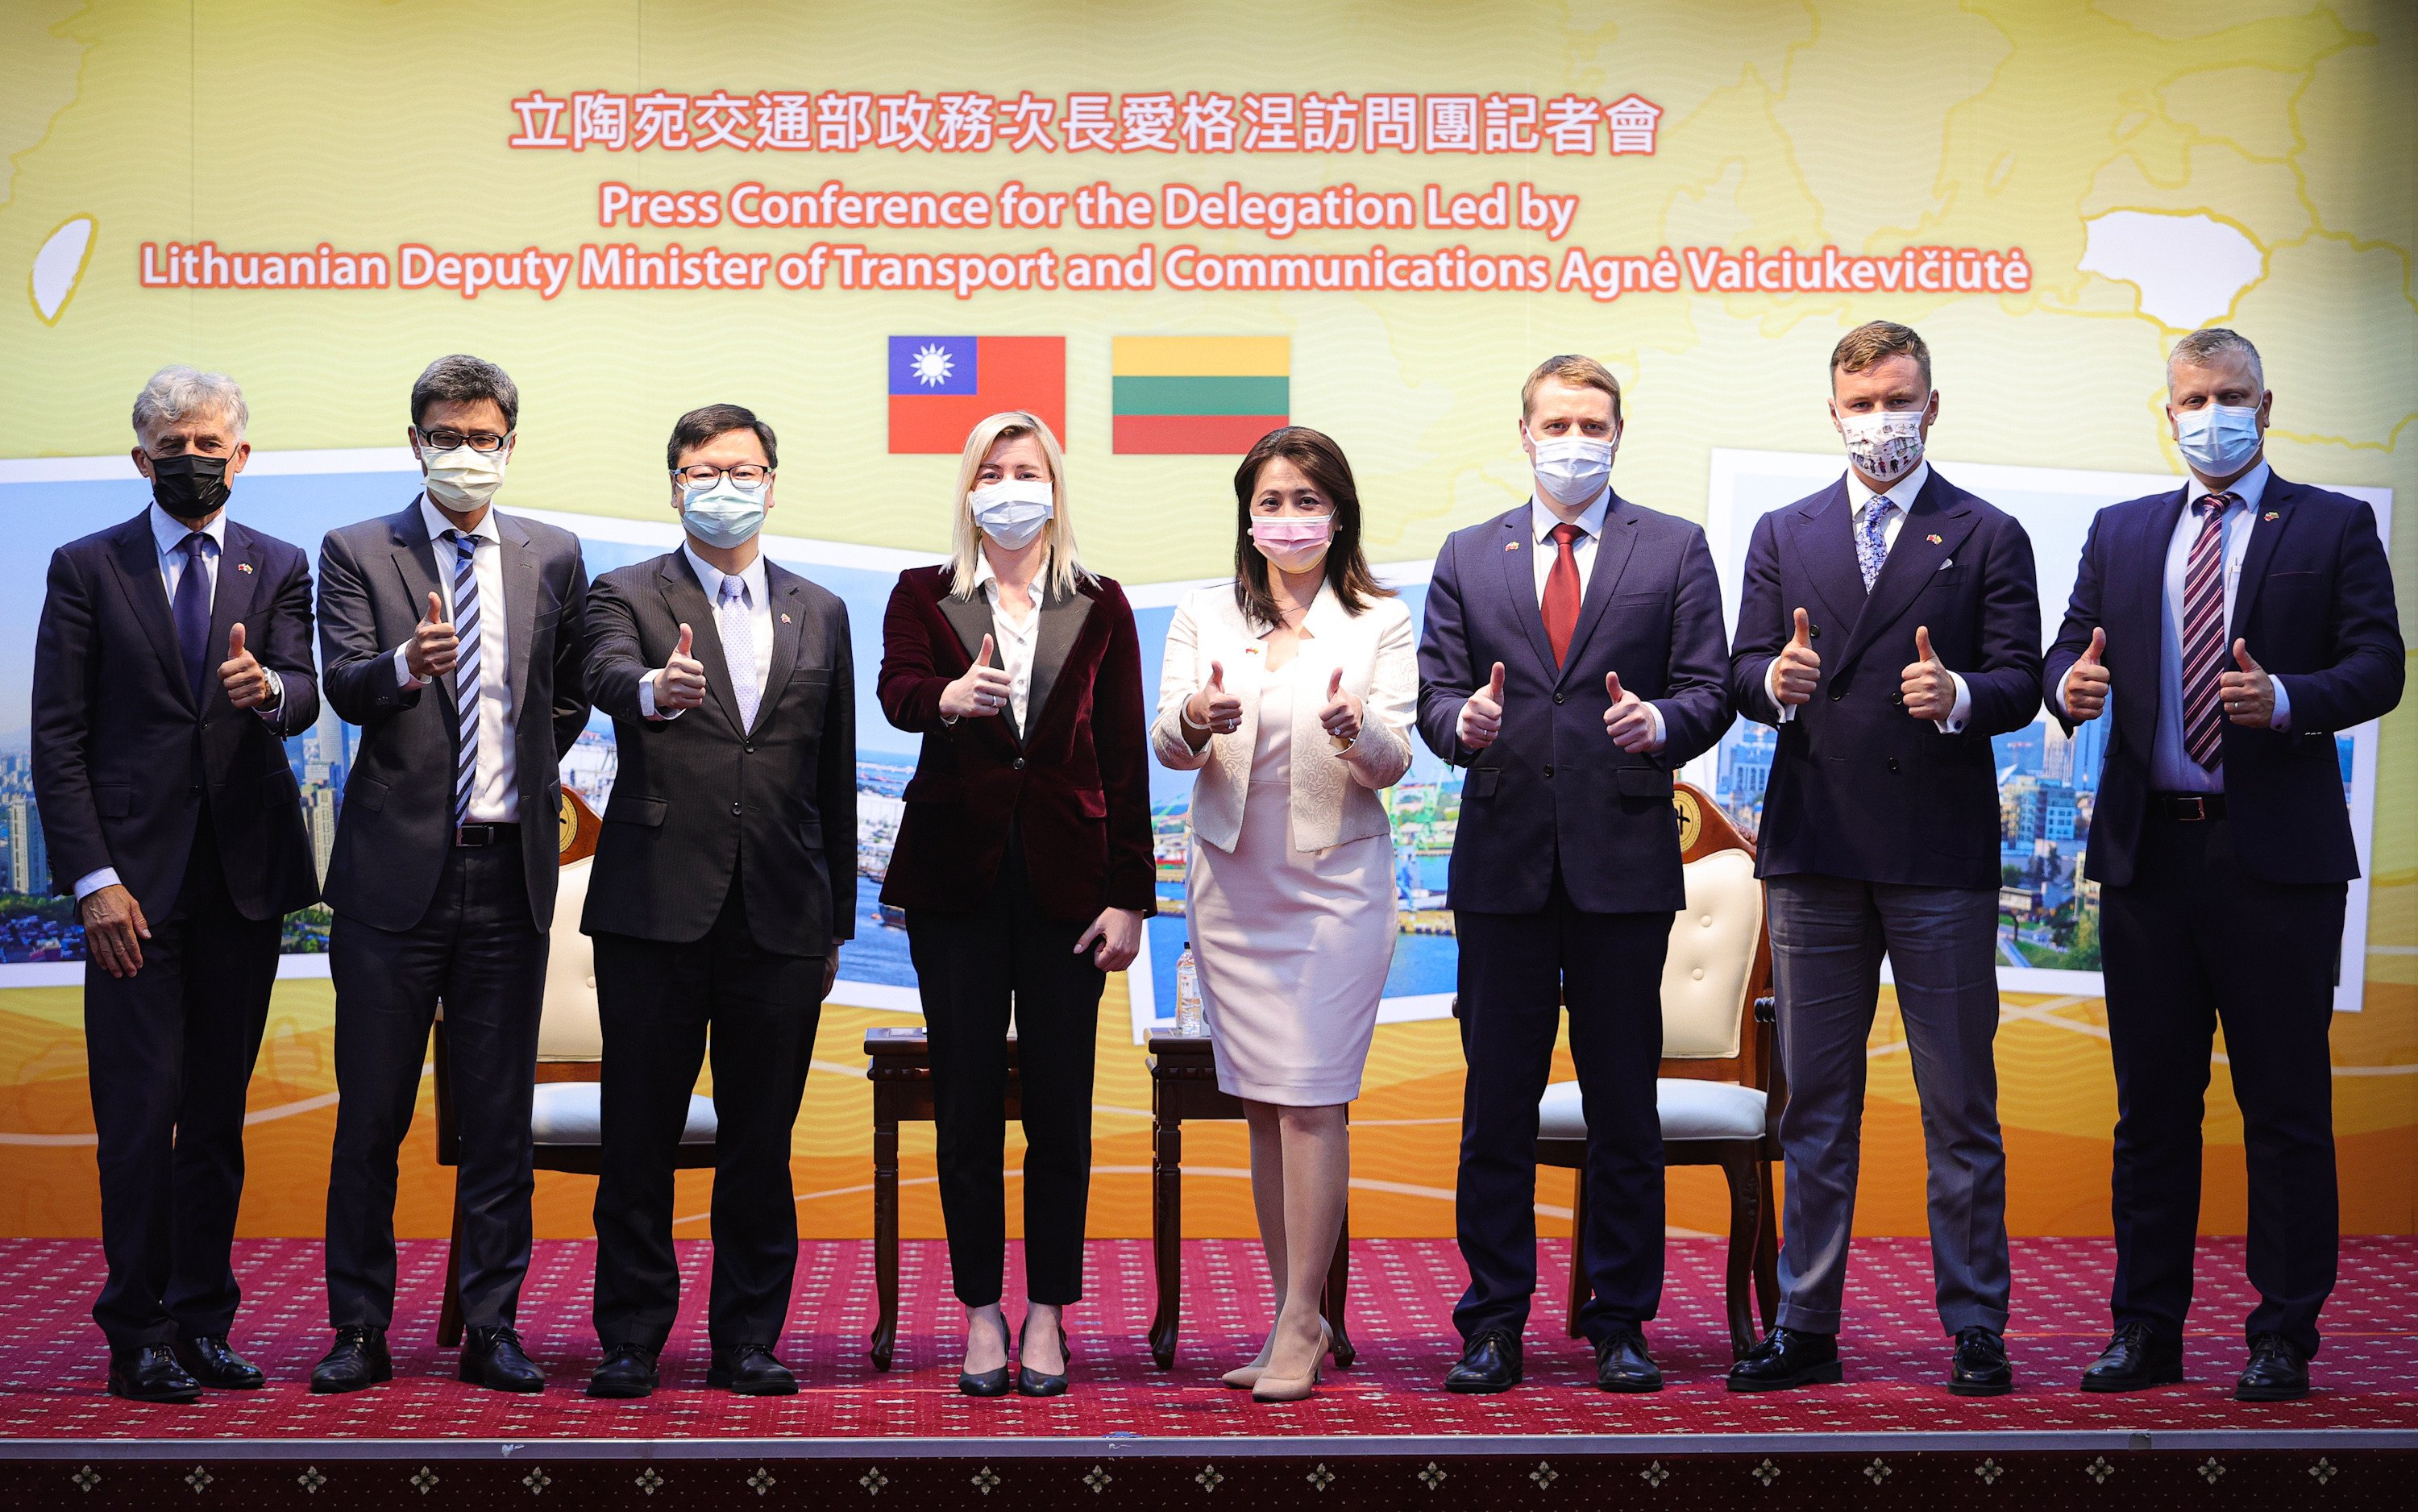 Lithuania’s deputy transport minister Agne Vaiciukeviciute (fourth from left) has been sanctioned by Beijing over her trip to Taiwan this week. Photo: CNA